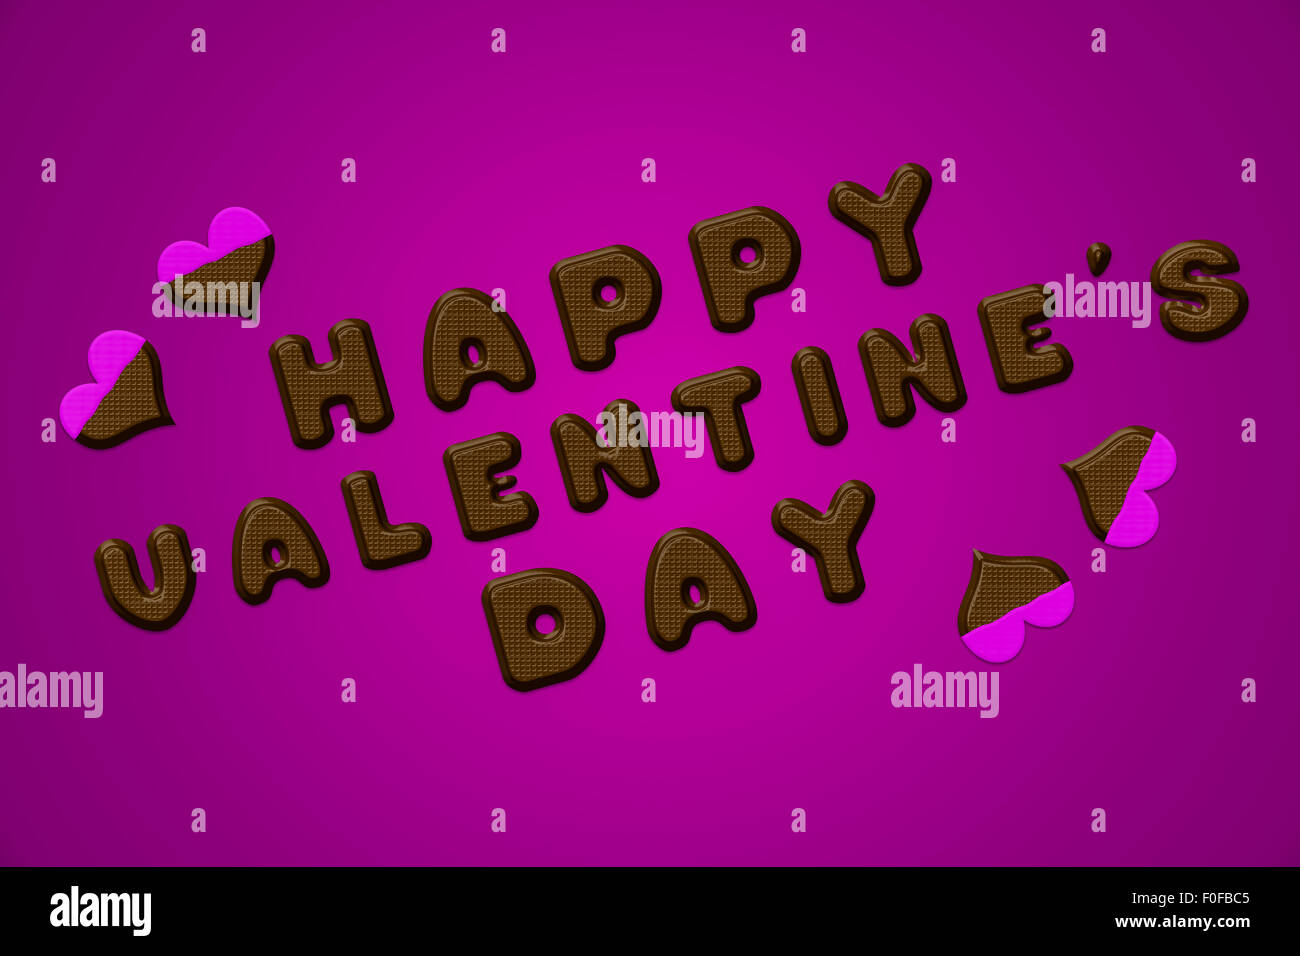 Happy valentine's day text and hearts in chocolate for valentine day. Illustration on purple background with pink icing. Stock Photo